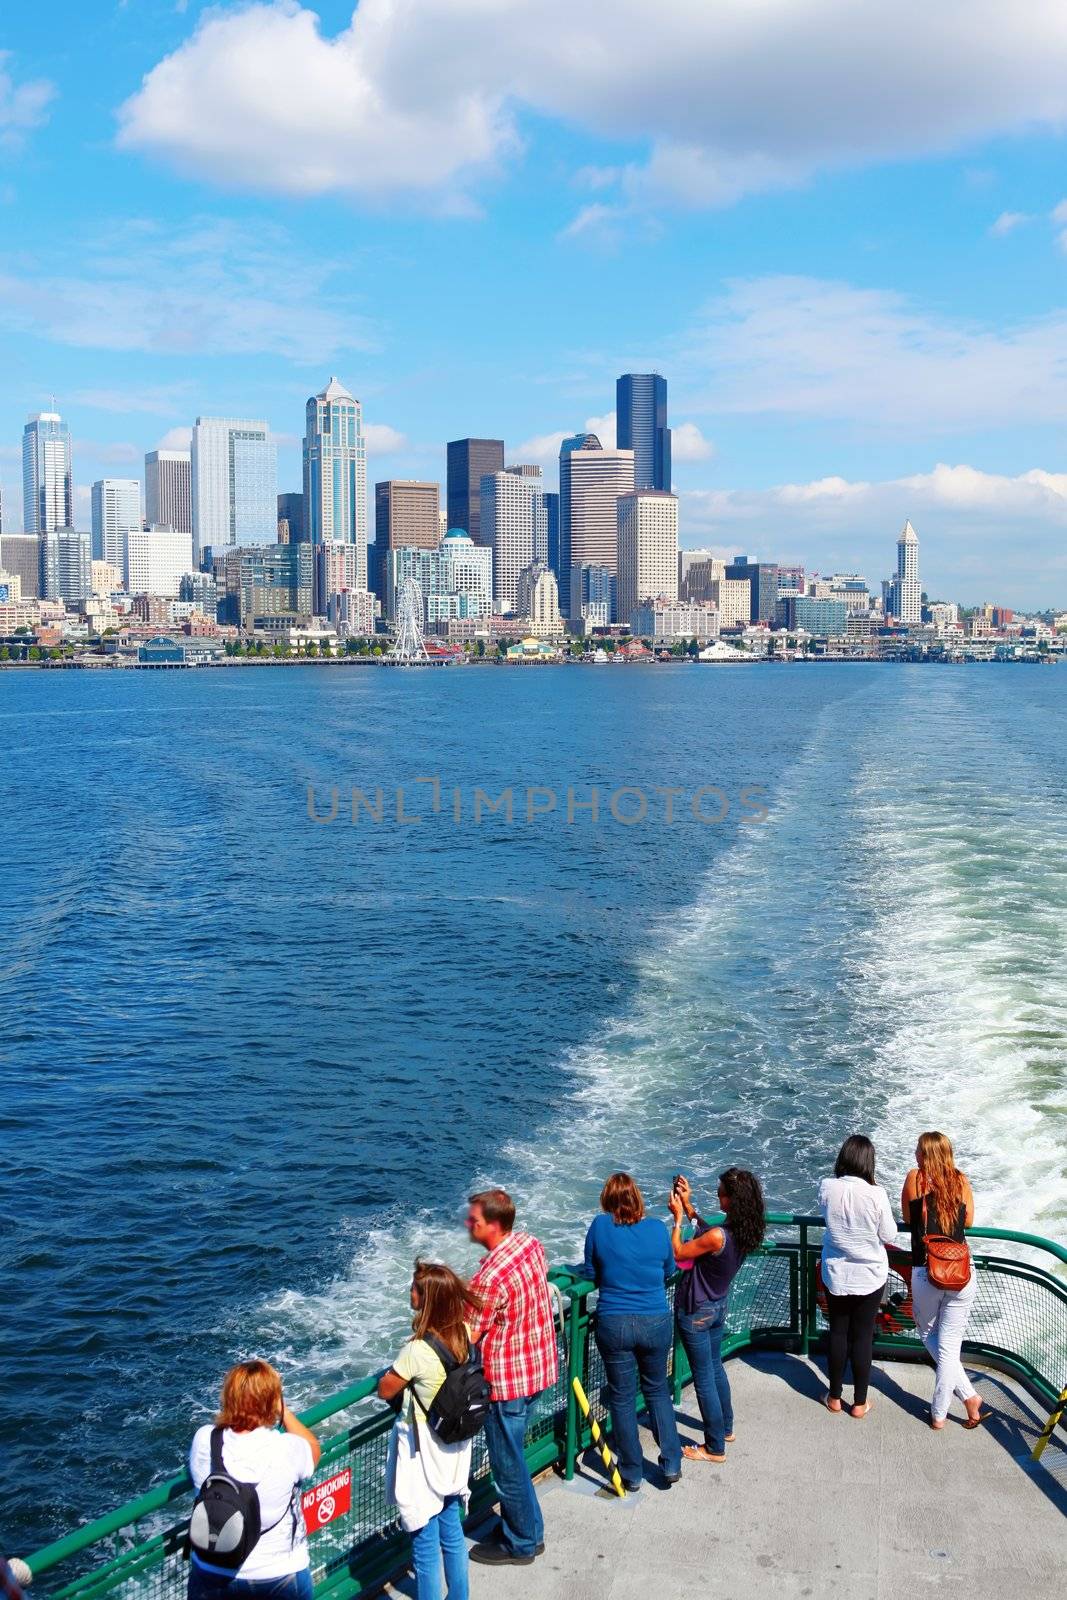 Seattle waterfront Pier 55 and 54. Downtown view from ferry.